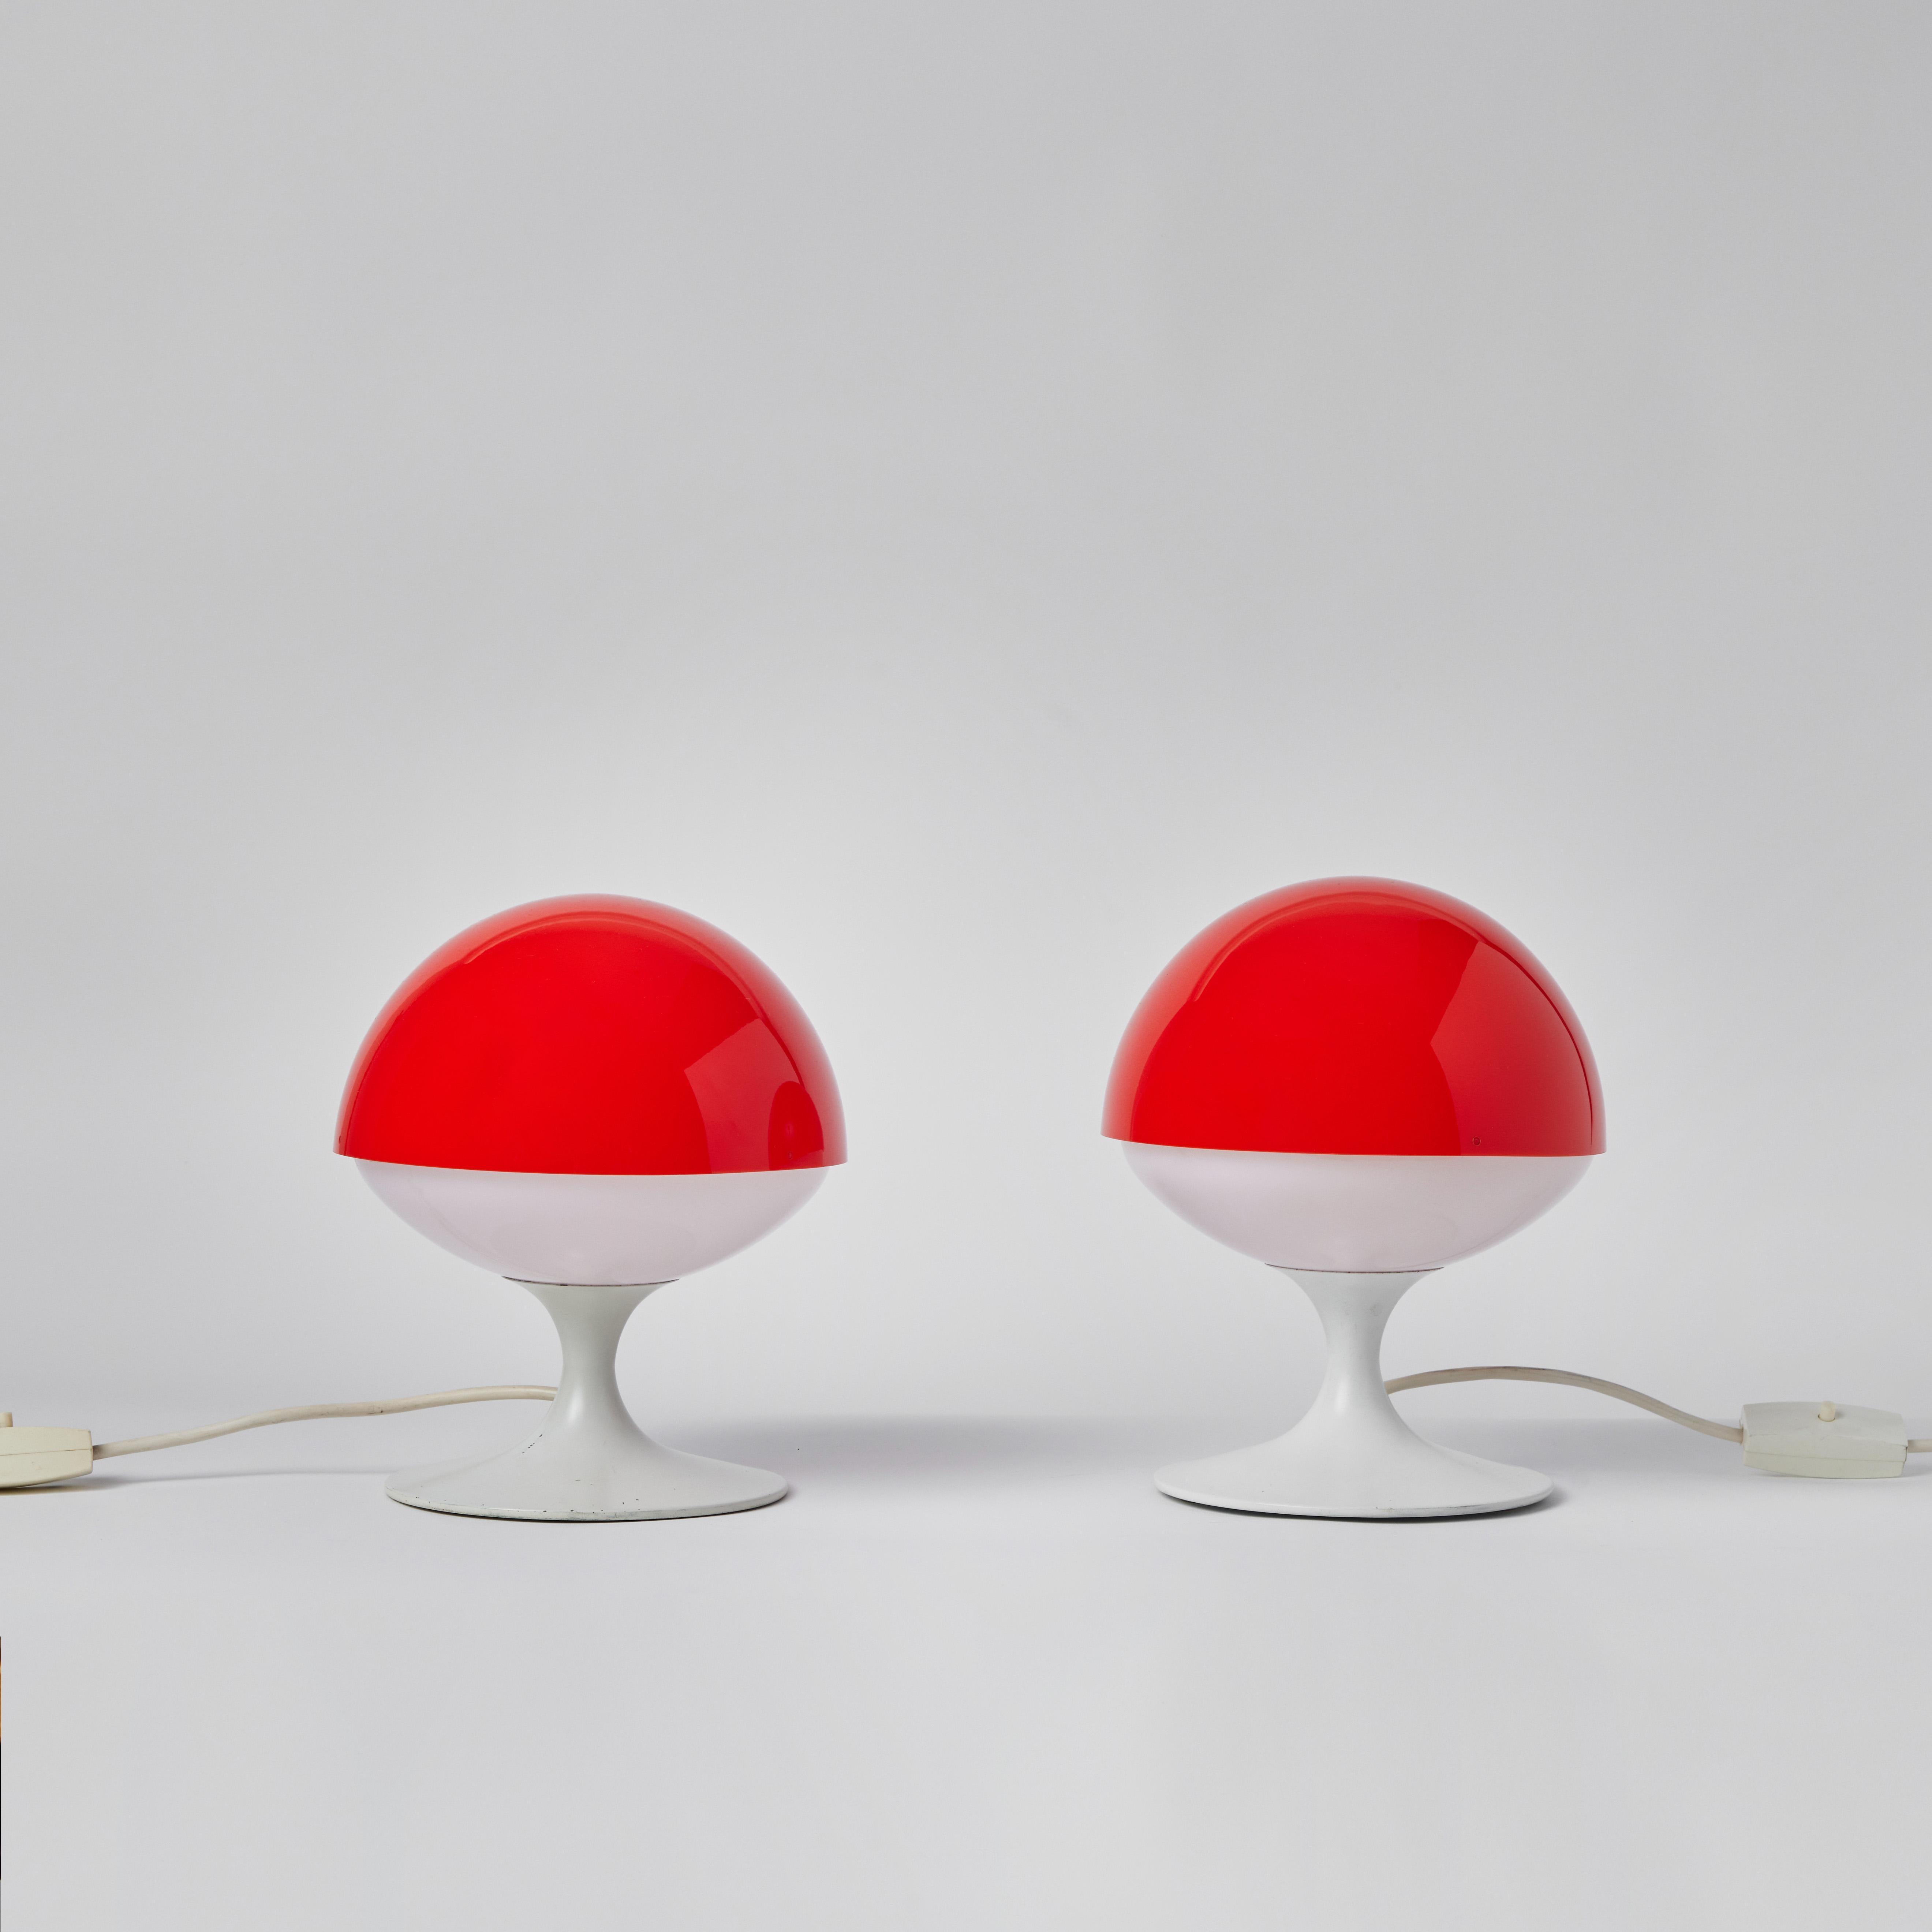 Mid-20th Century Pair of 1960s Max Bill Red & White Table Lamps for Temde Leuchten, Switzerland For Sale